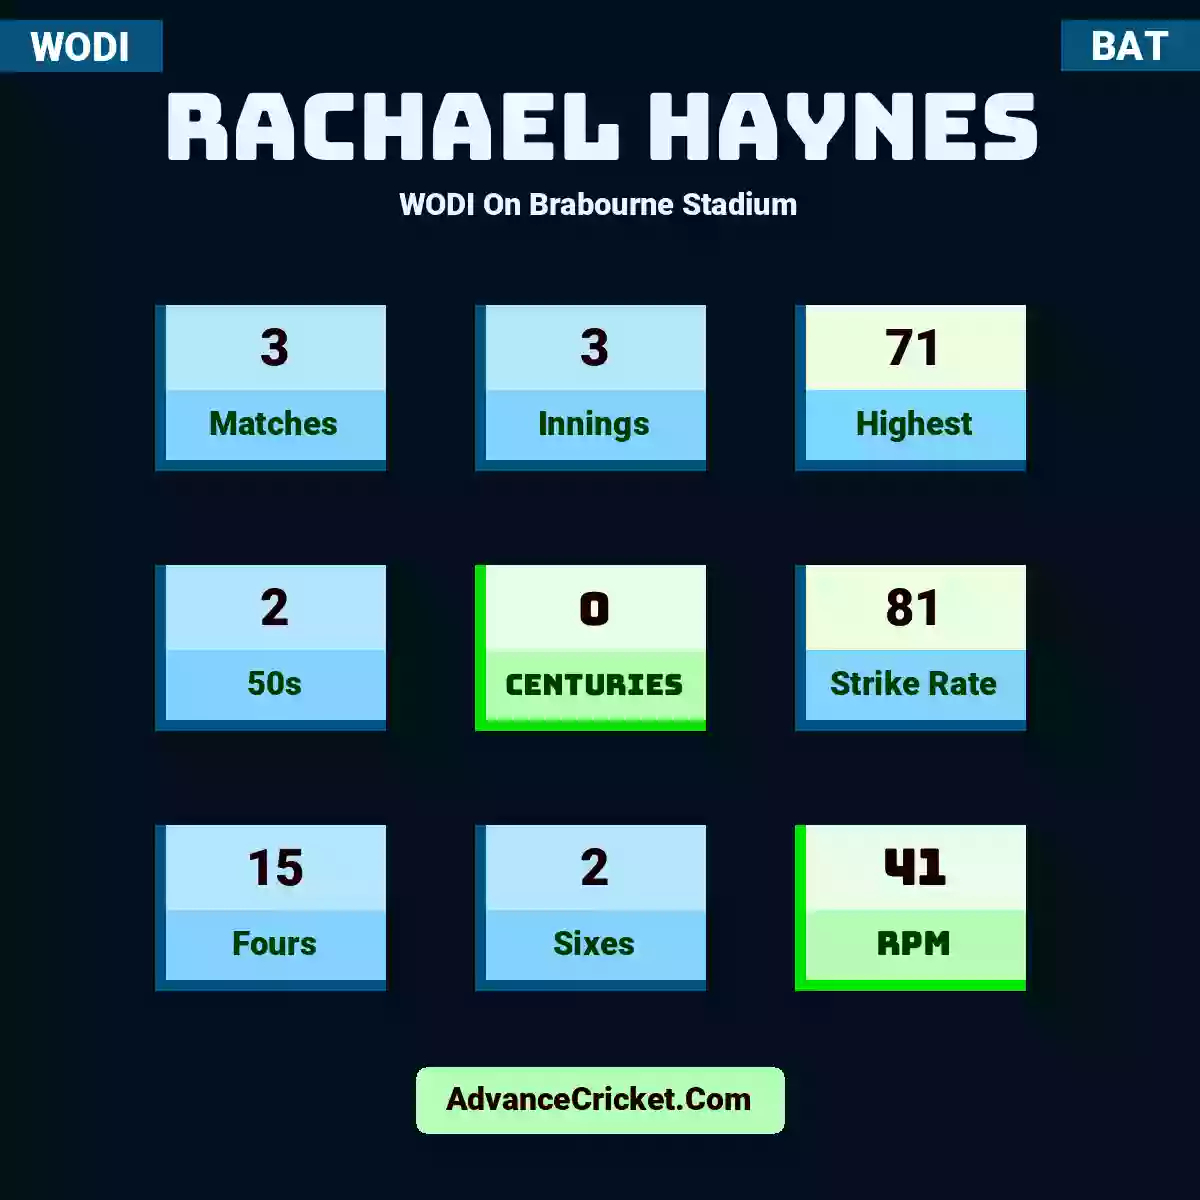 Rachael Haynes WODI  On Brabourne Stadium, Rachael Haynes played 3 matches, scored 71 runs as highest, 2 half-centuries, and 0 centuries, with a strike rate of 81. R.Haynes hit 15 fours and 2 sixes, with an RPM of 41.